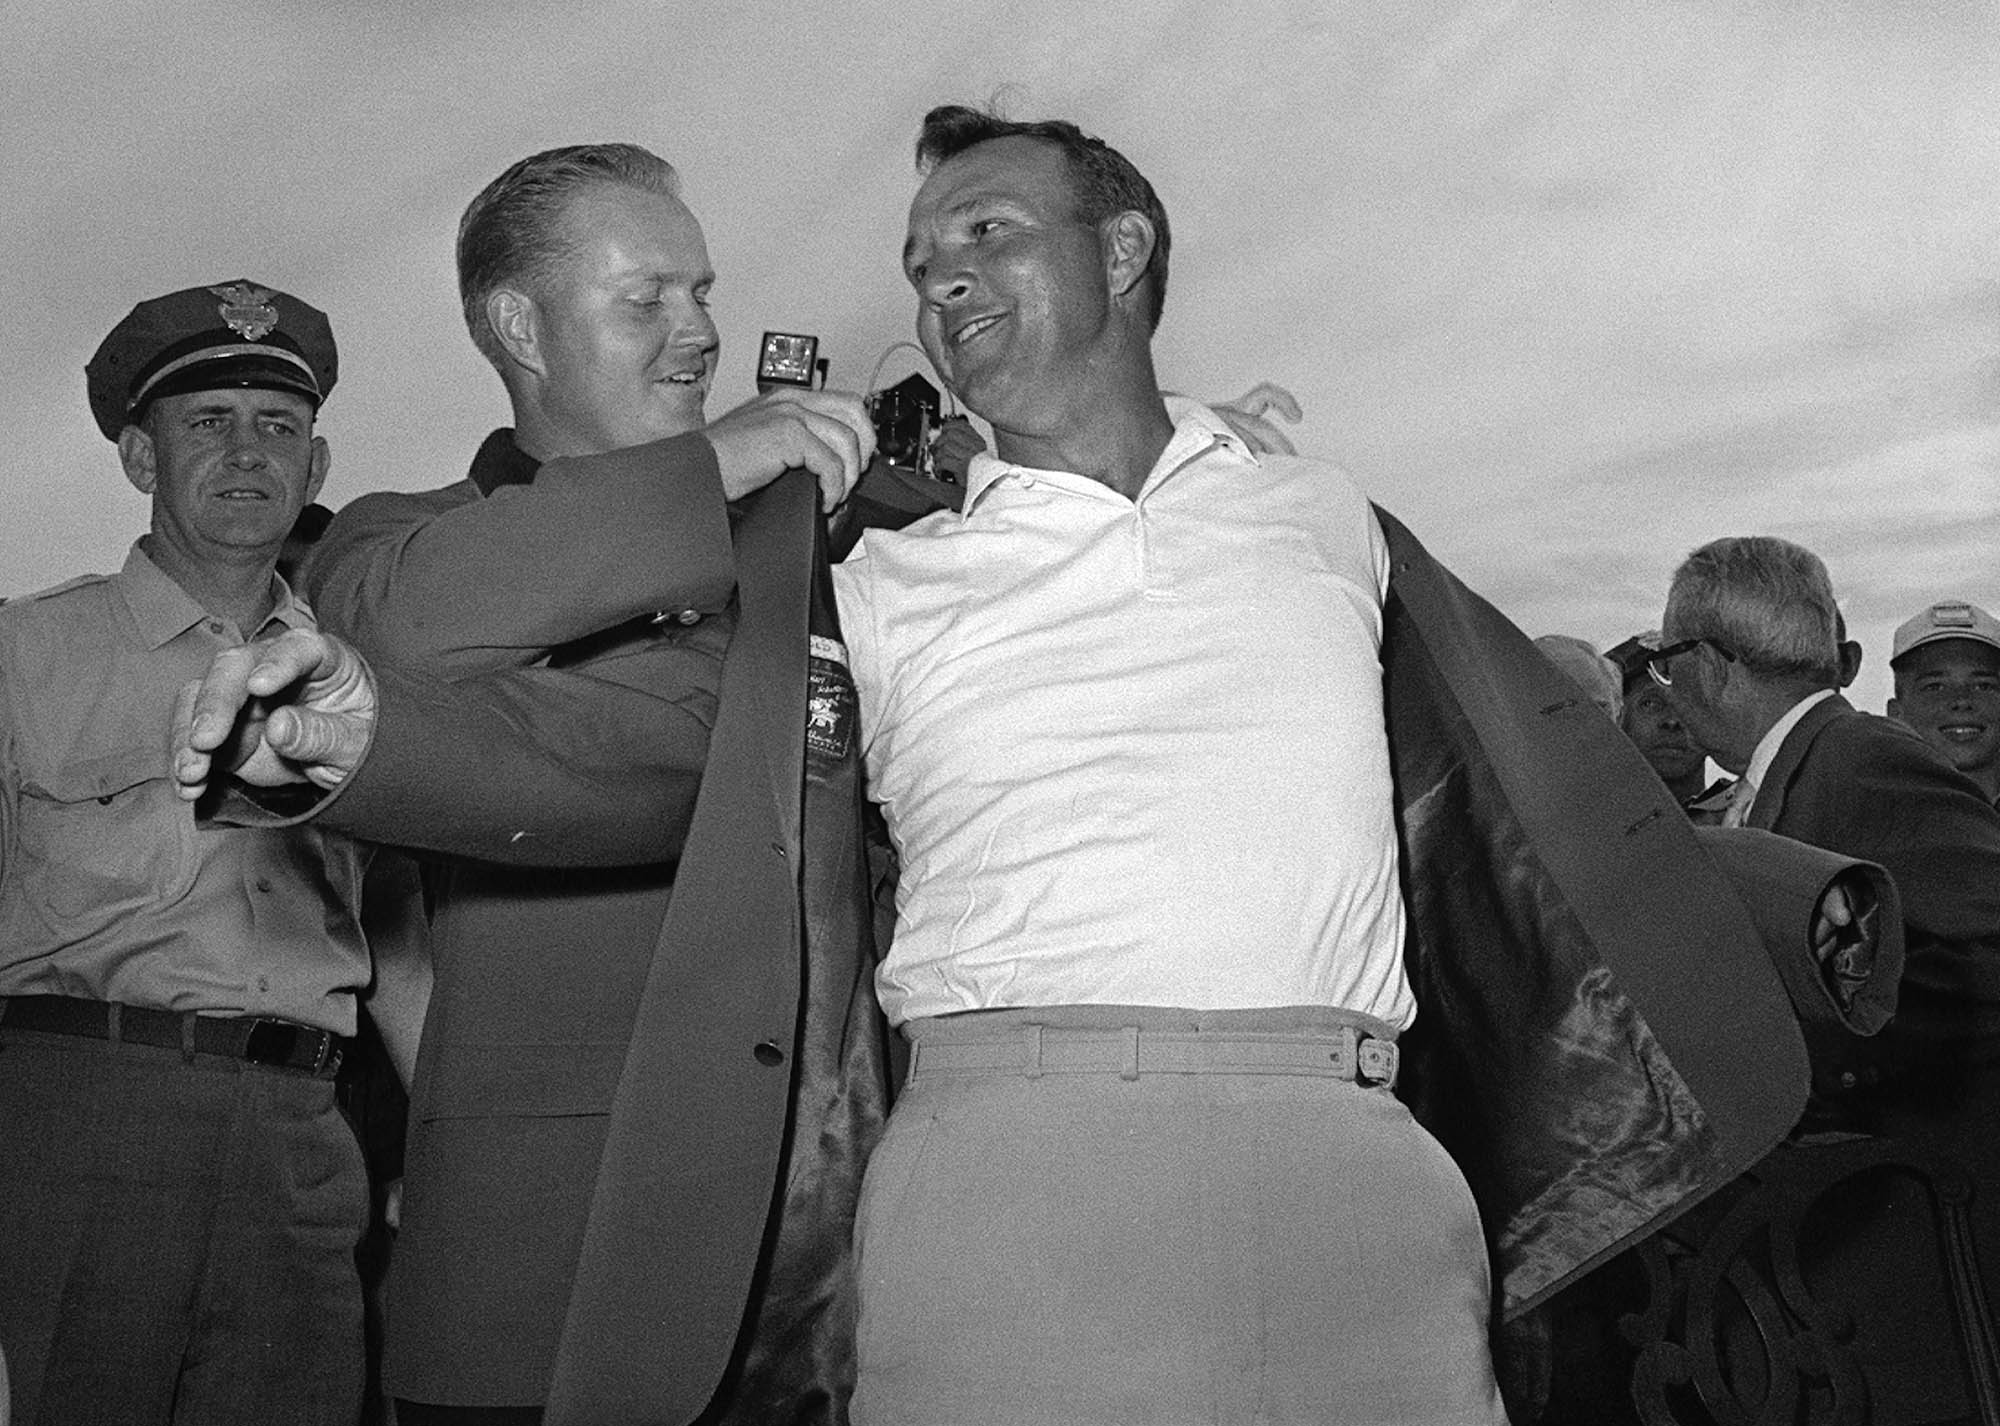 Arnold Palmer, right, slips into his green jacket with help from Jack Nicklaus after winning the Masters golf championship, in Augusta, Ga, April 12, 1964. (AP)